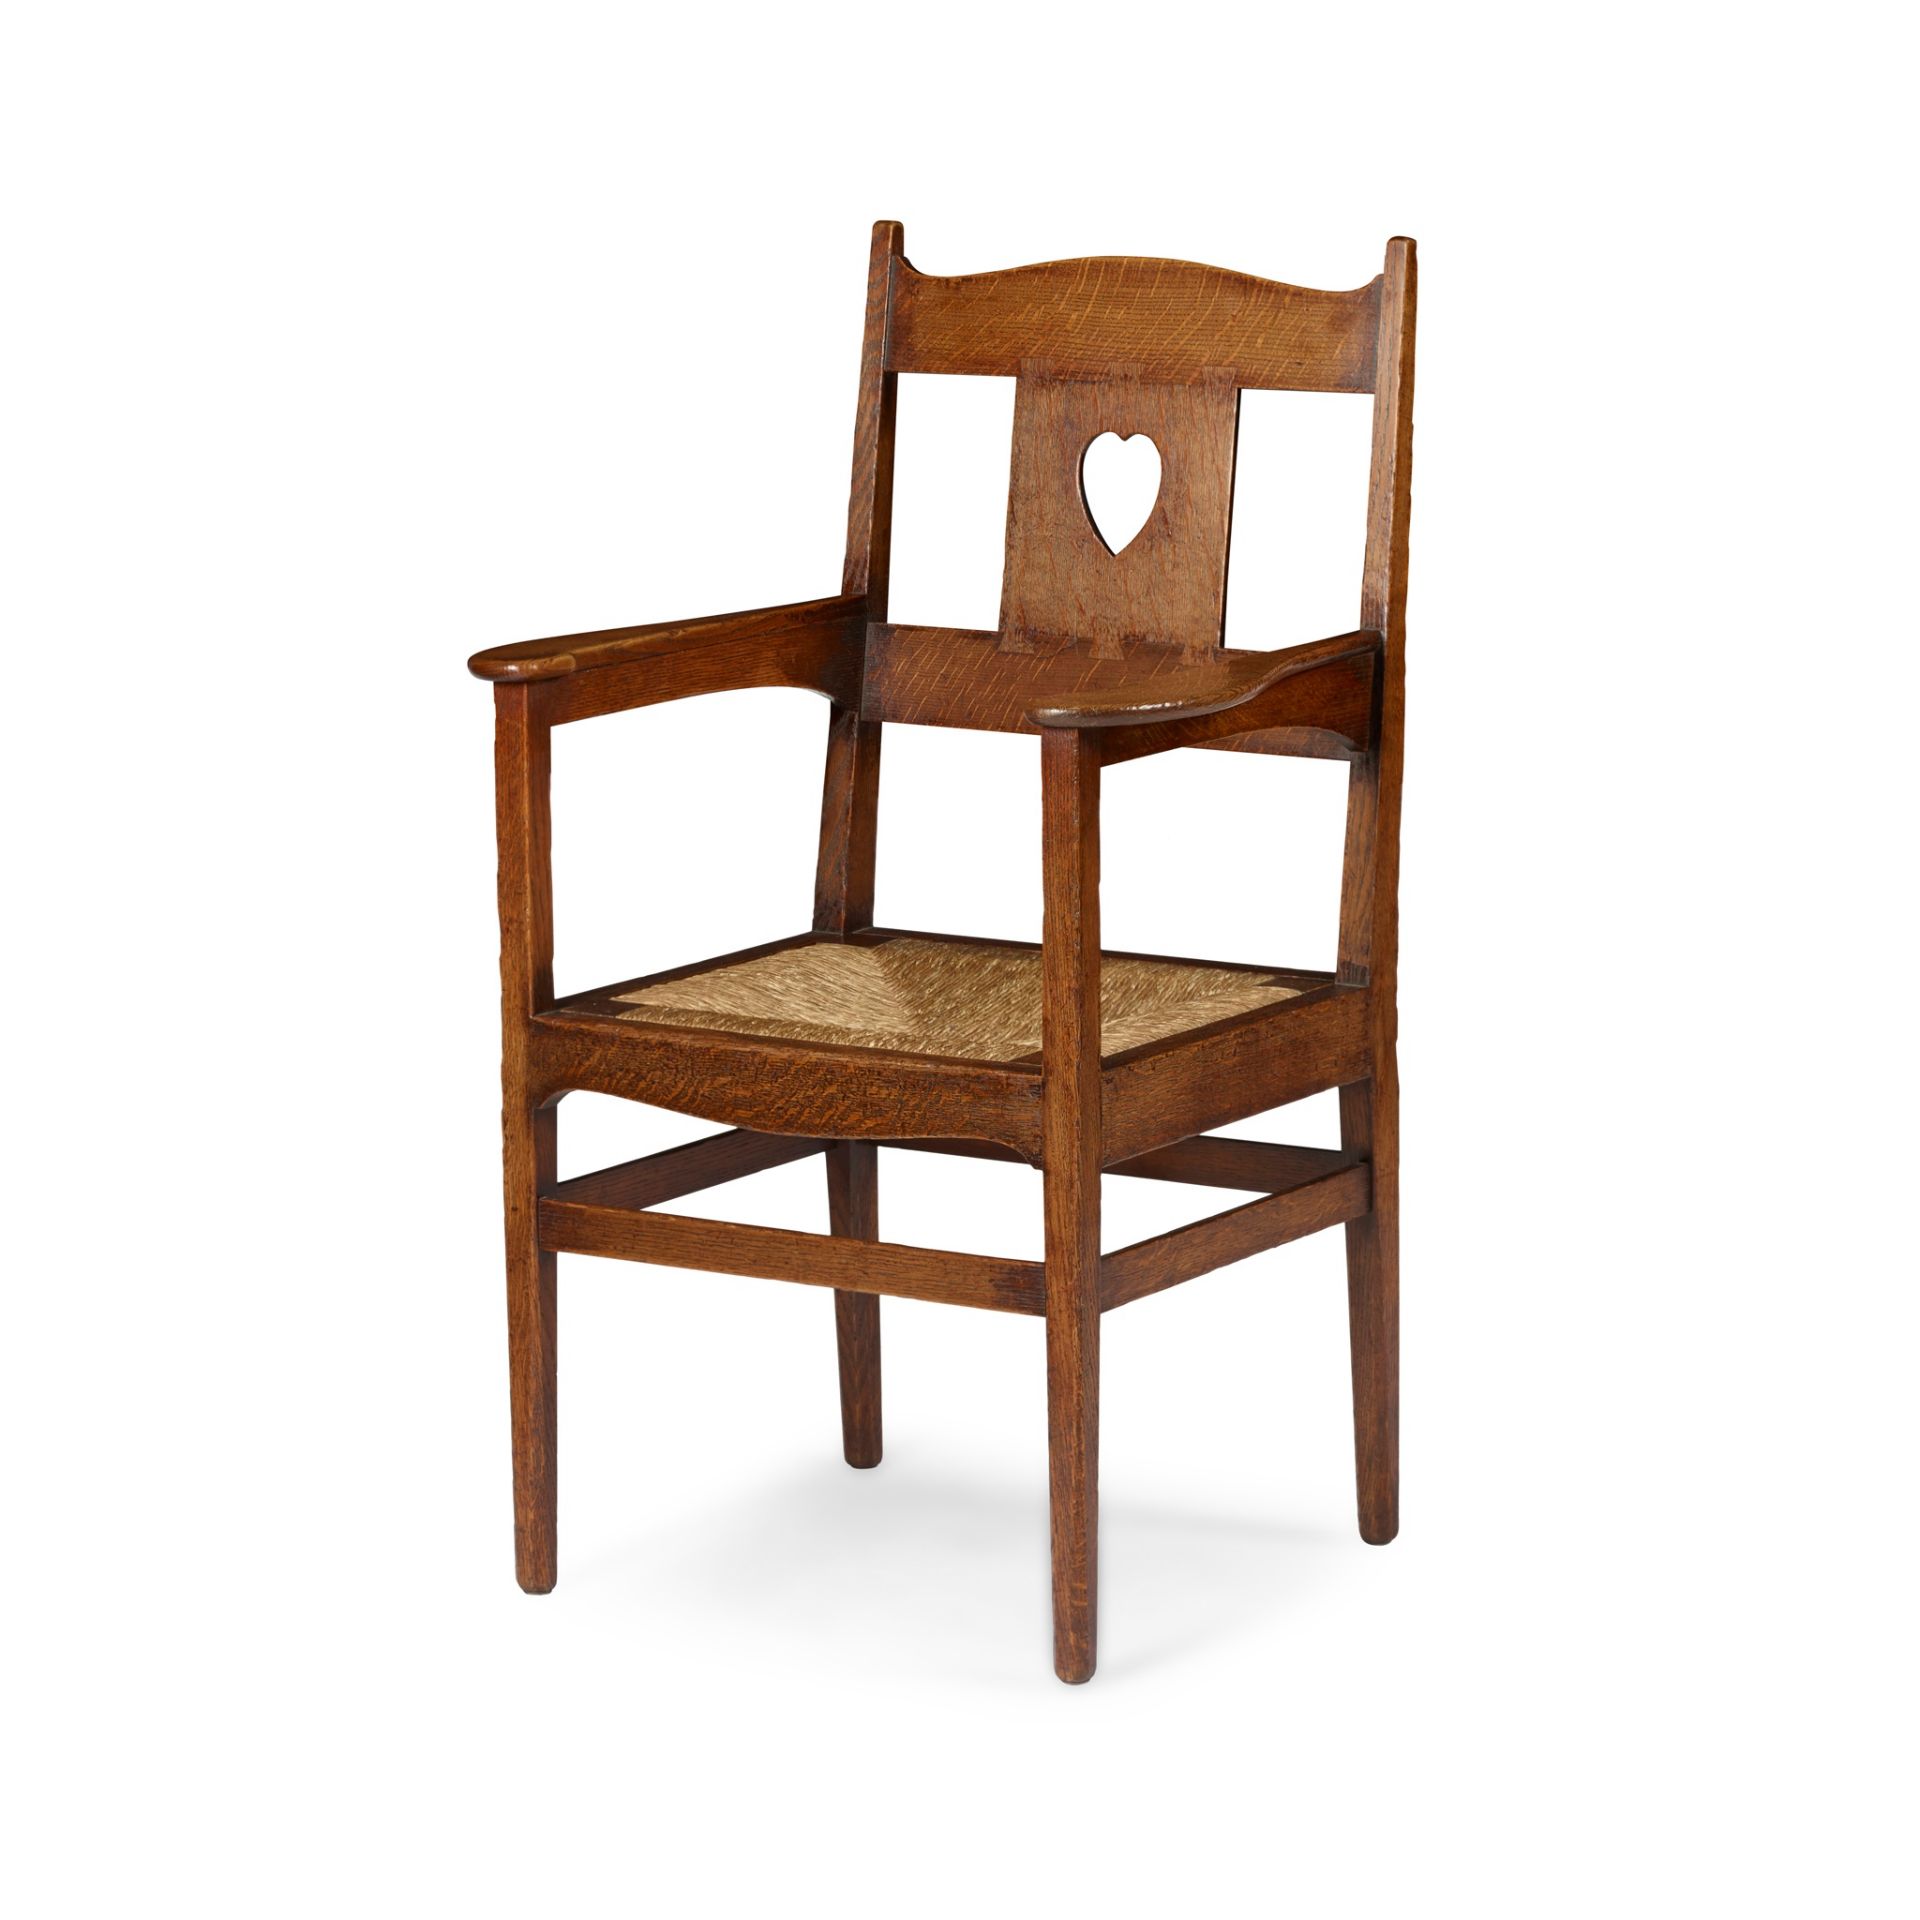 C.F.A. VOYSEY (1857-1941) (DESIGNER), F.C.NIELSON, LONDON (ATTRIBUTED MAKER) ARTS & CRAFTS ARMCHAIR,